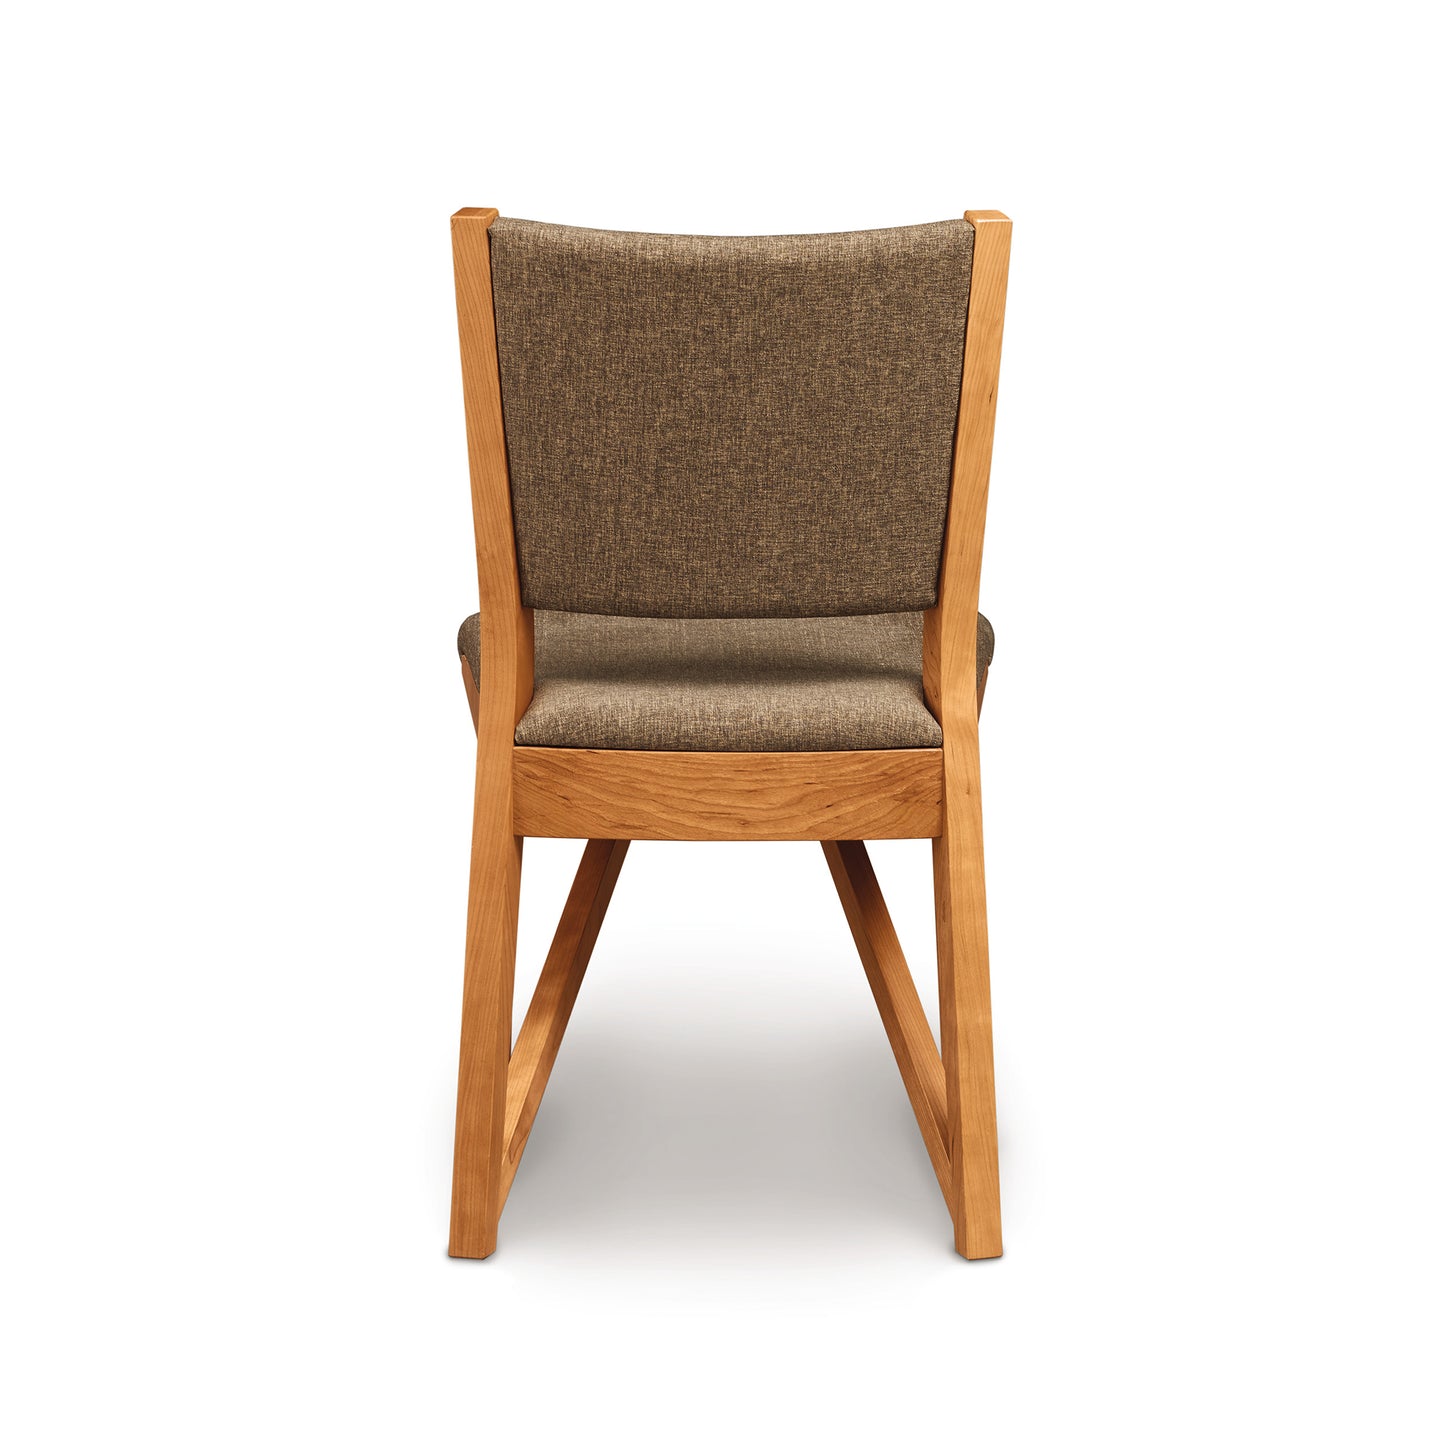 An Exeter Chair from Copeland Furniture featuring a brown upholstered seat and backrest, isolated against a white background, emanates modern style from the Exeter Furniture Collection.